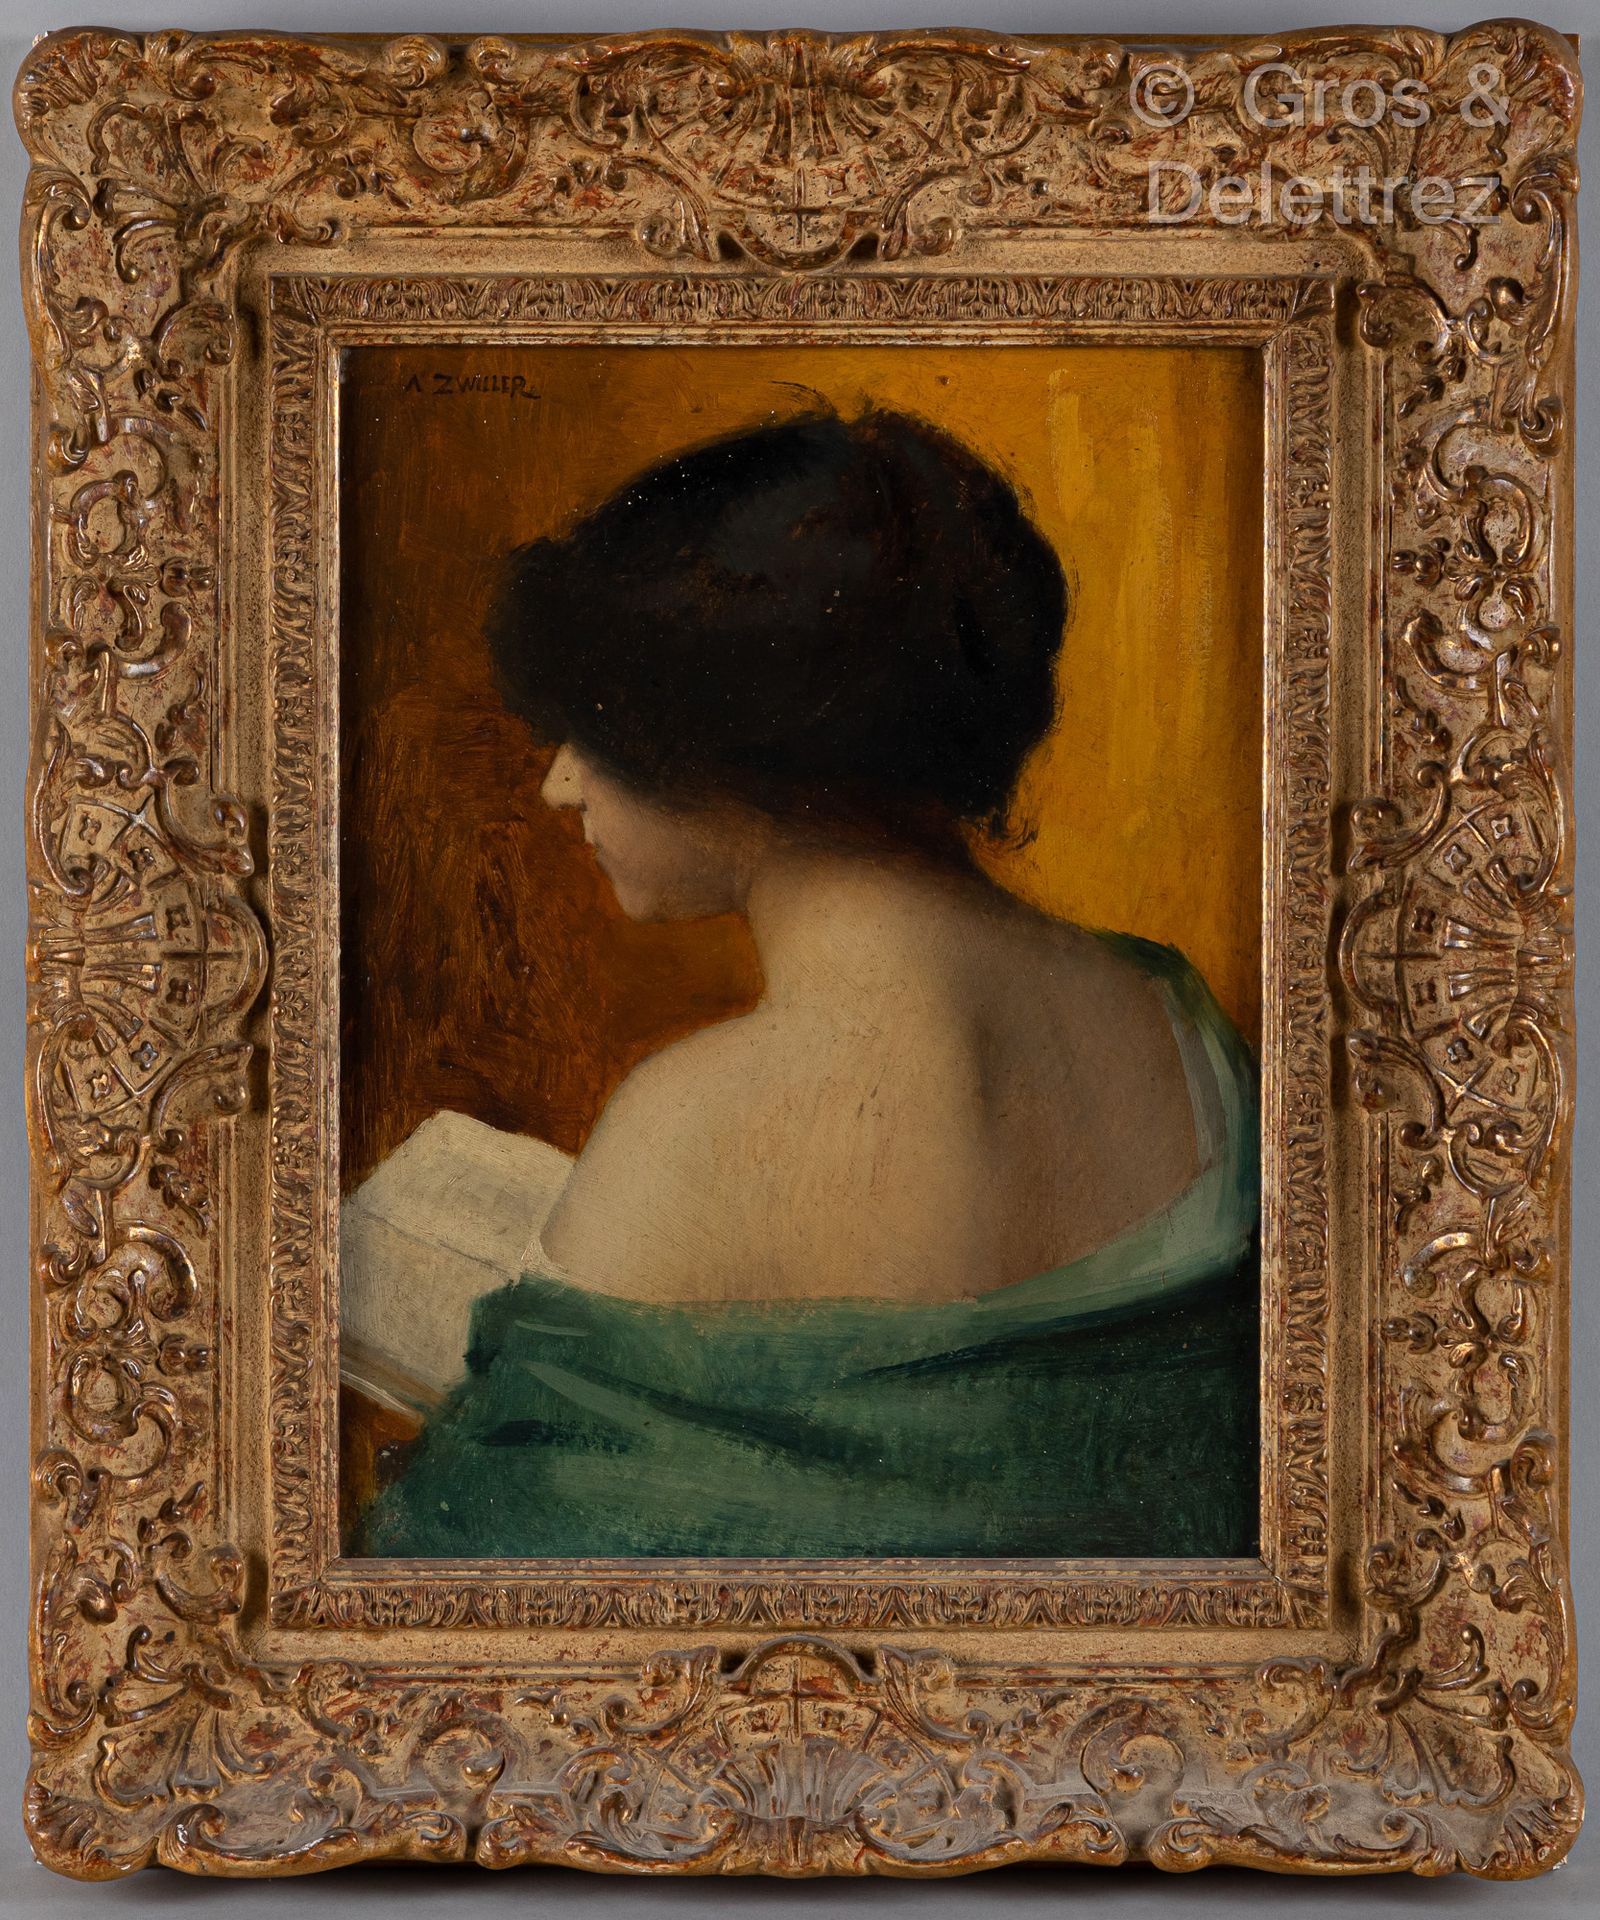 Augustin ZWILLER (1850-1939) Portrait of a woman with her back to a book

Oil on&hellip;